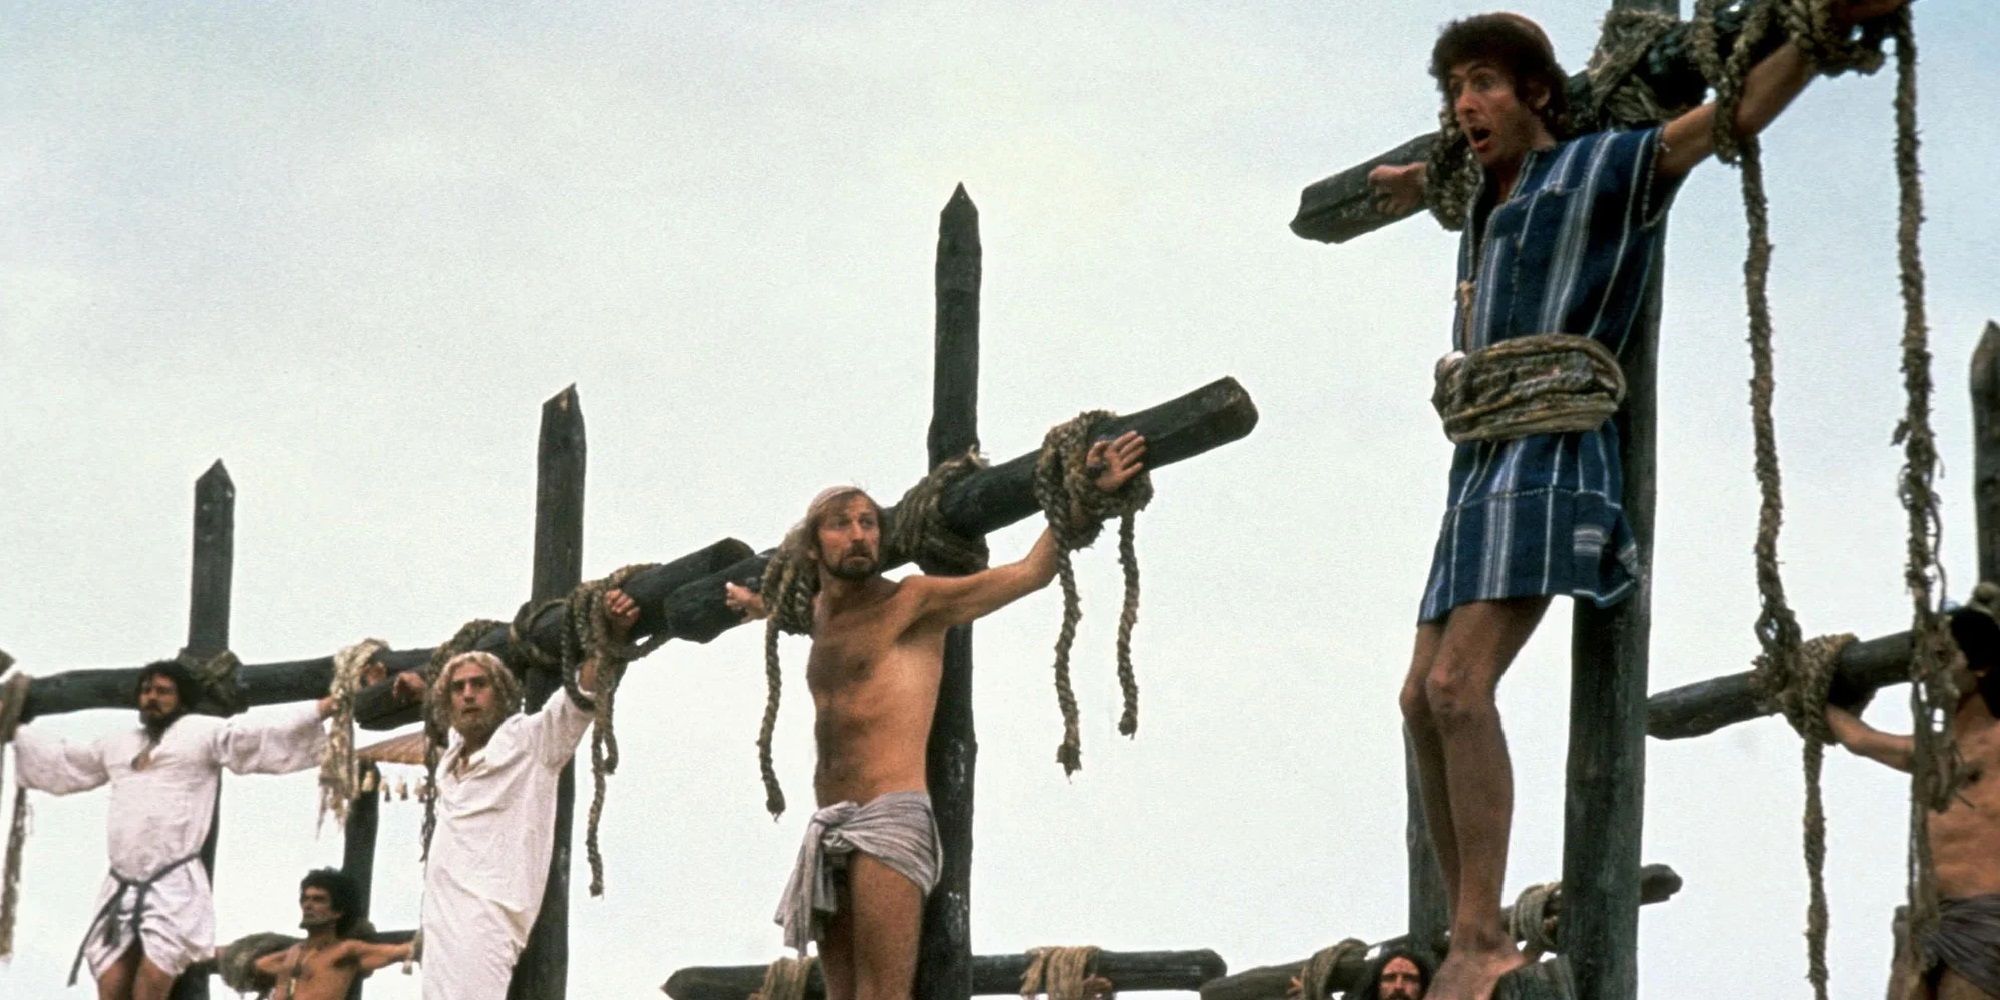 The final scene of Monty Python's Life of Brian